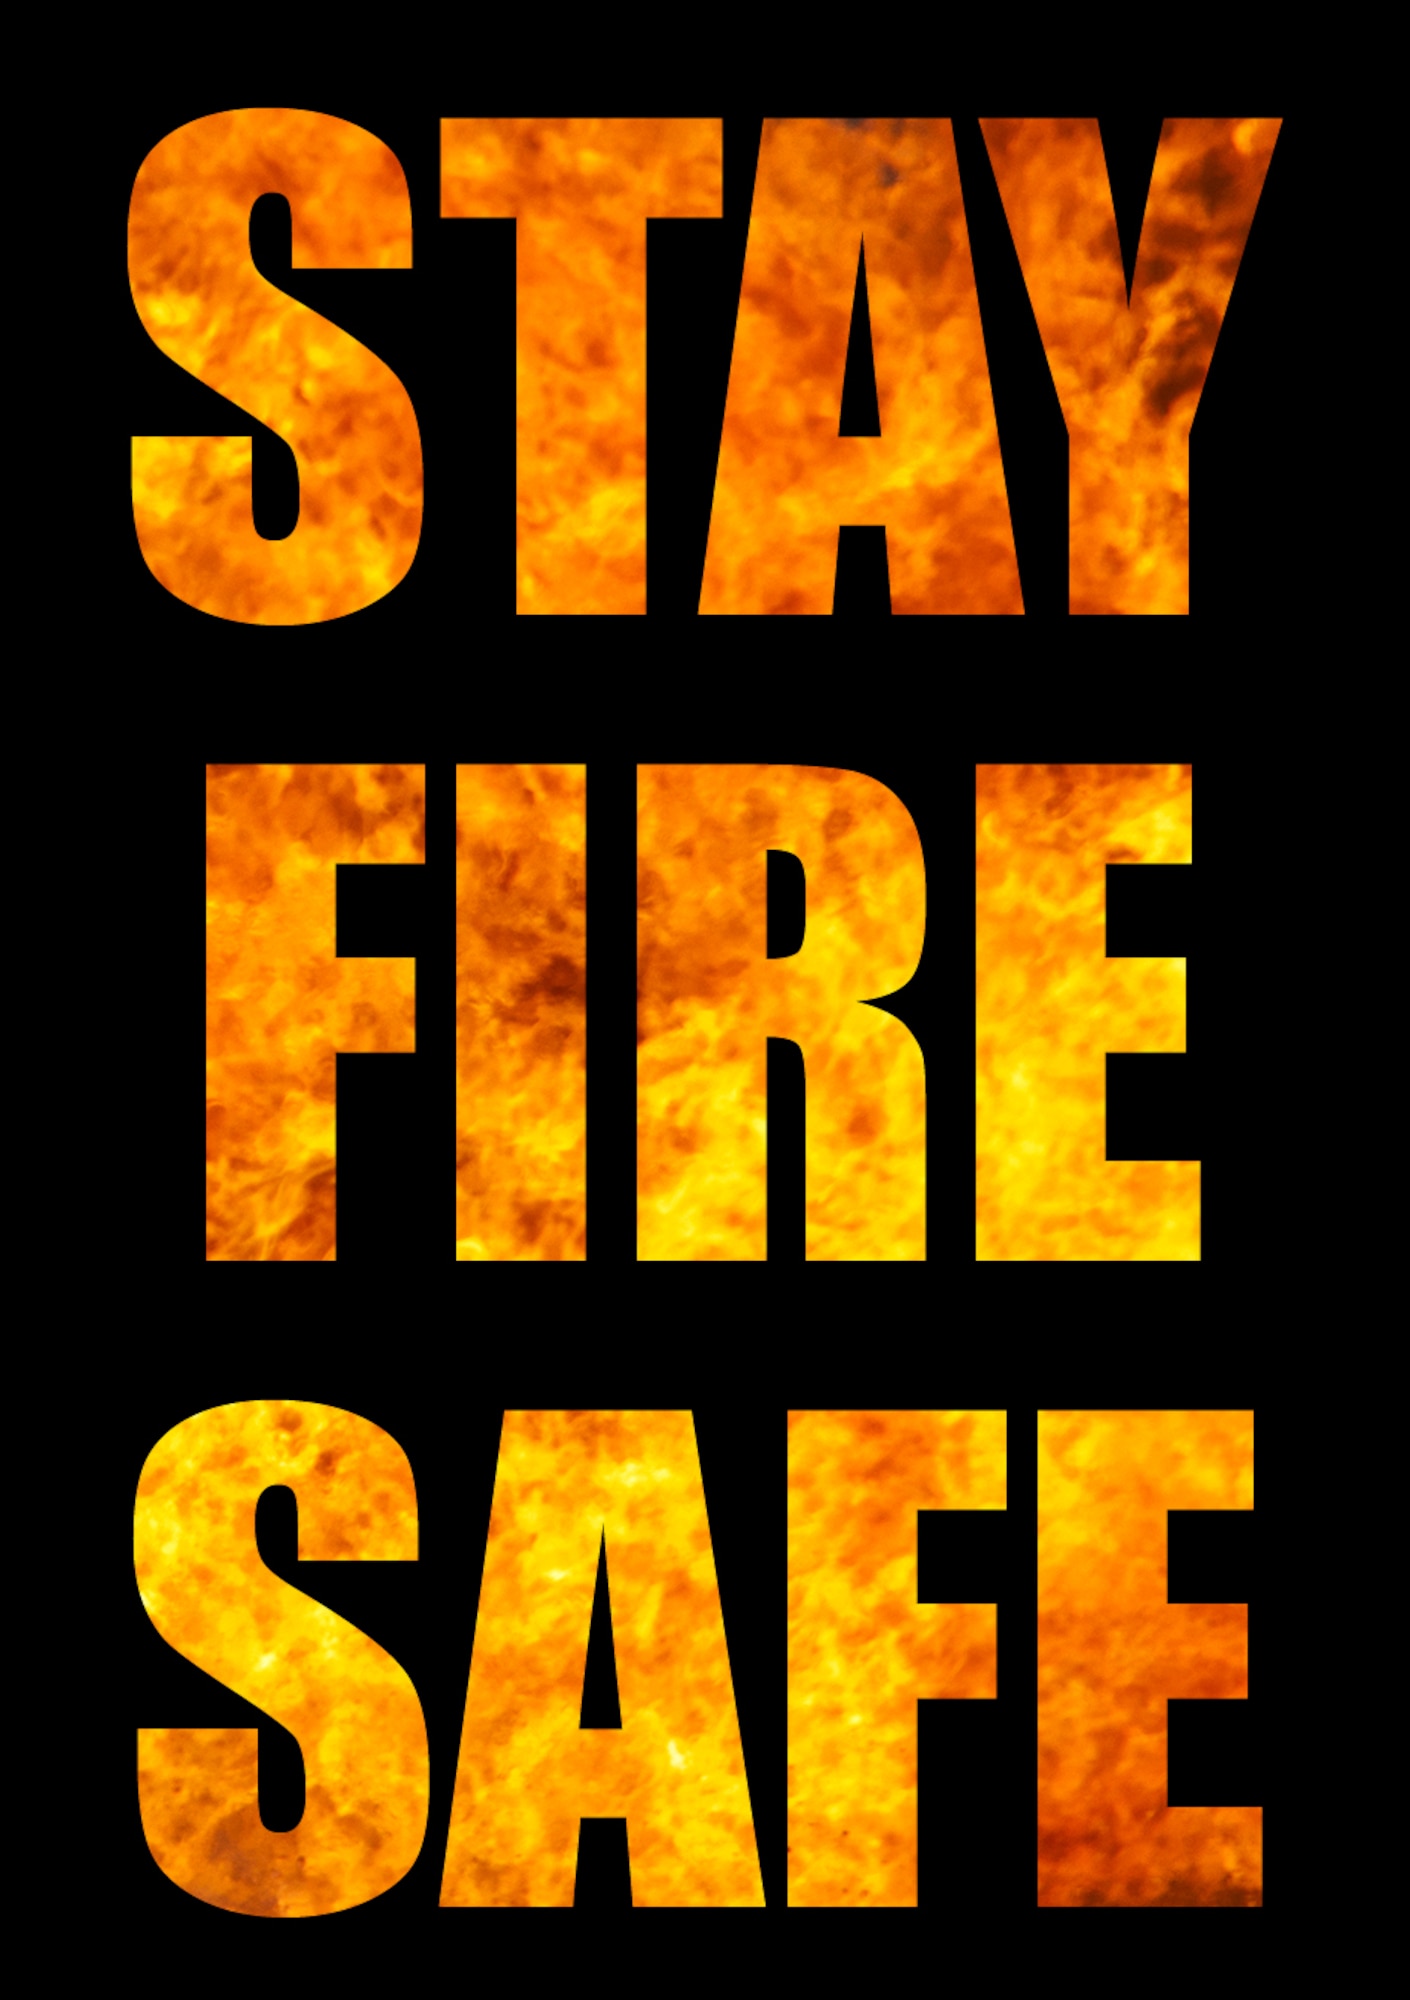 Make fire safety a priority year-round. U.S. Air Force graphic by Susan Scheuer